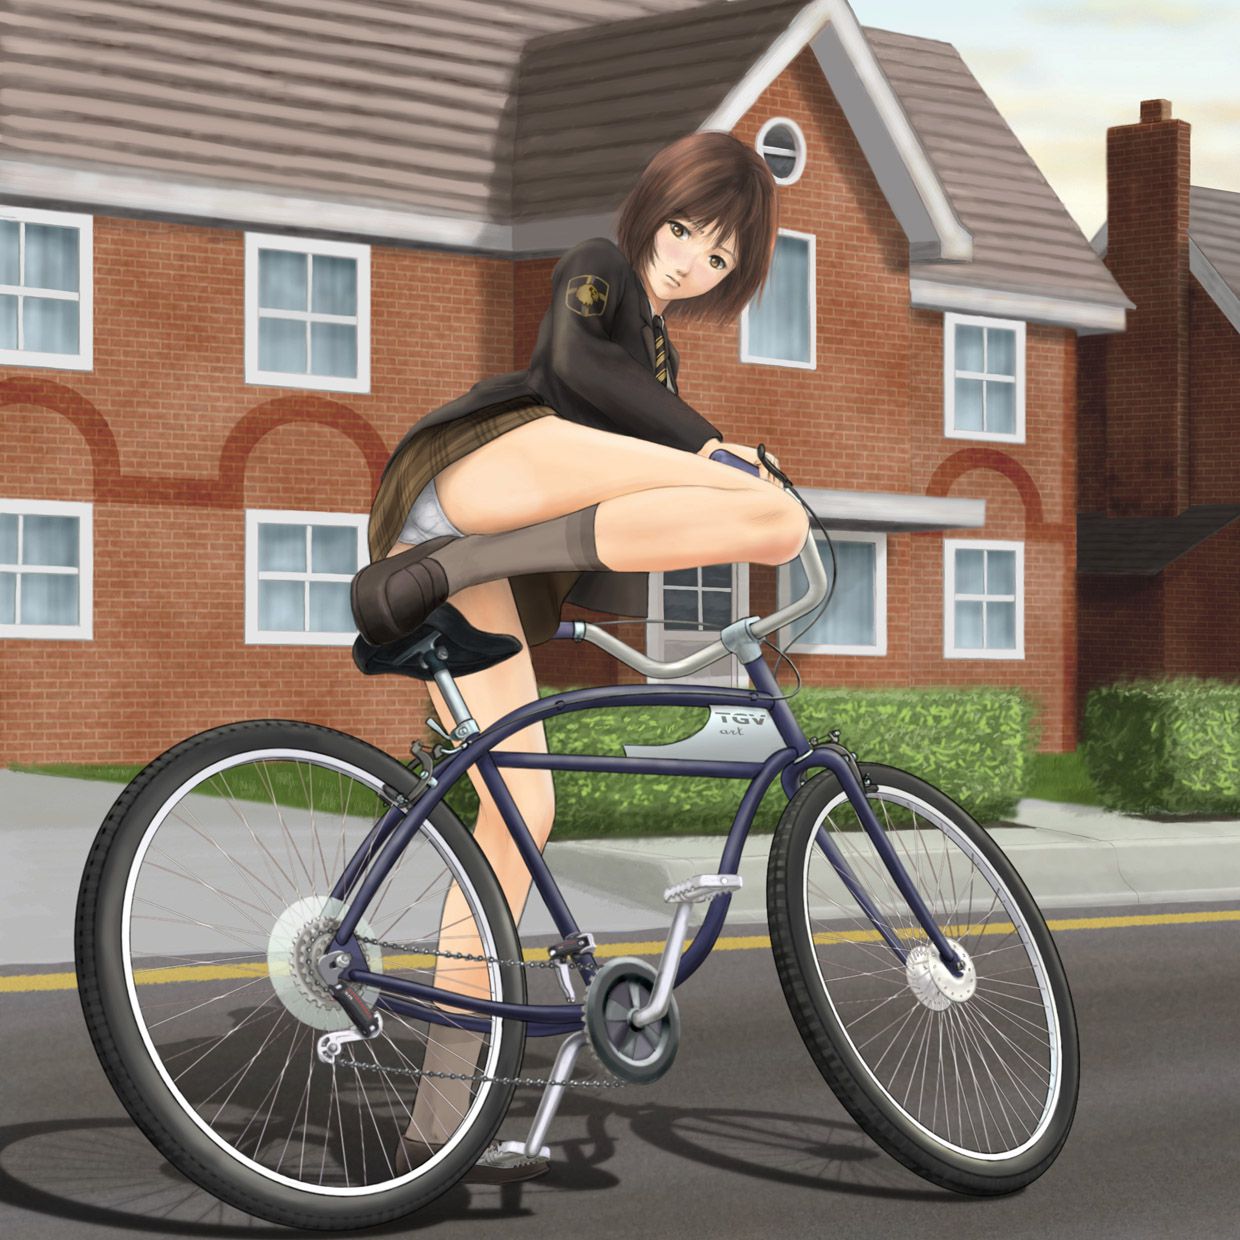 【Secondary】Erotic image of "bicycle panchira" where a country schoolgirl serves a salaryman on her way to work every morning 31